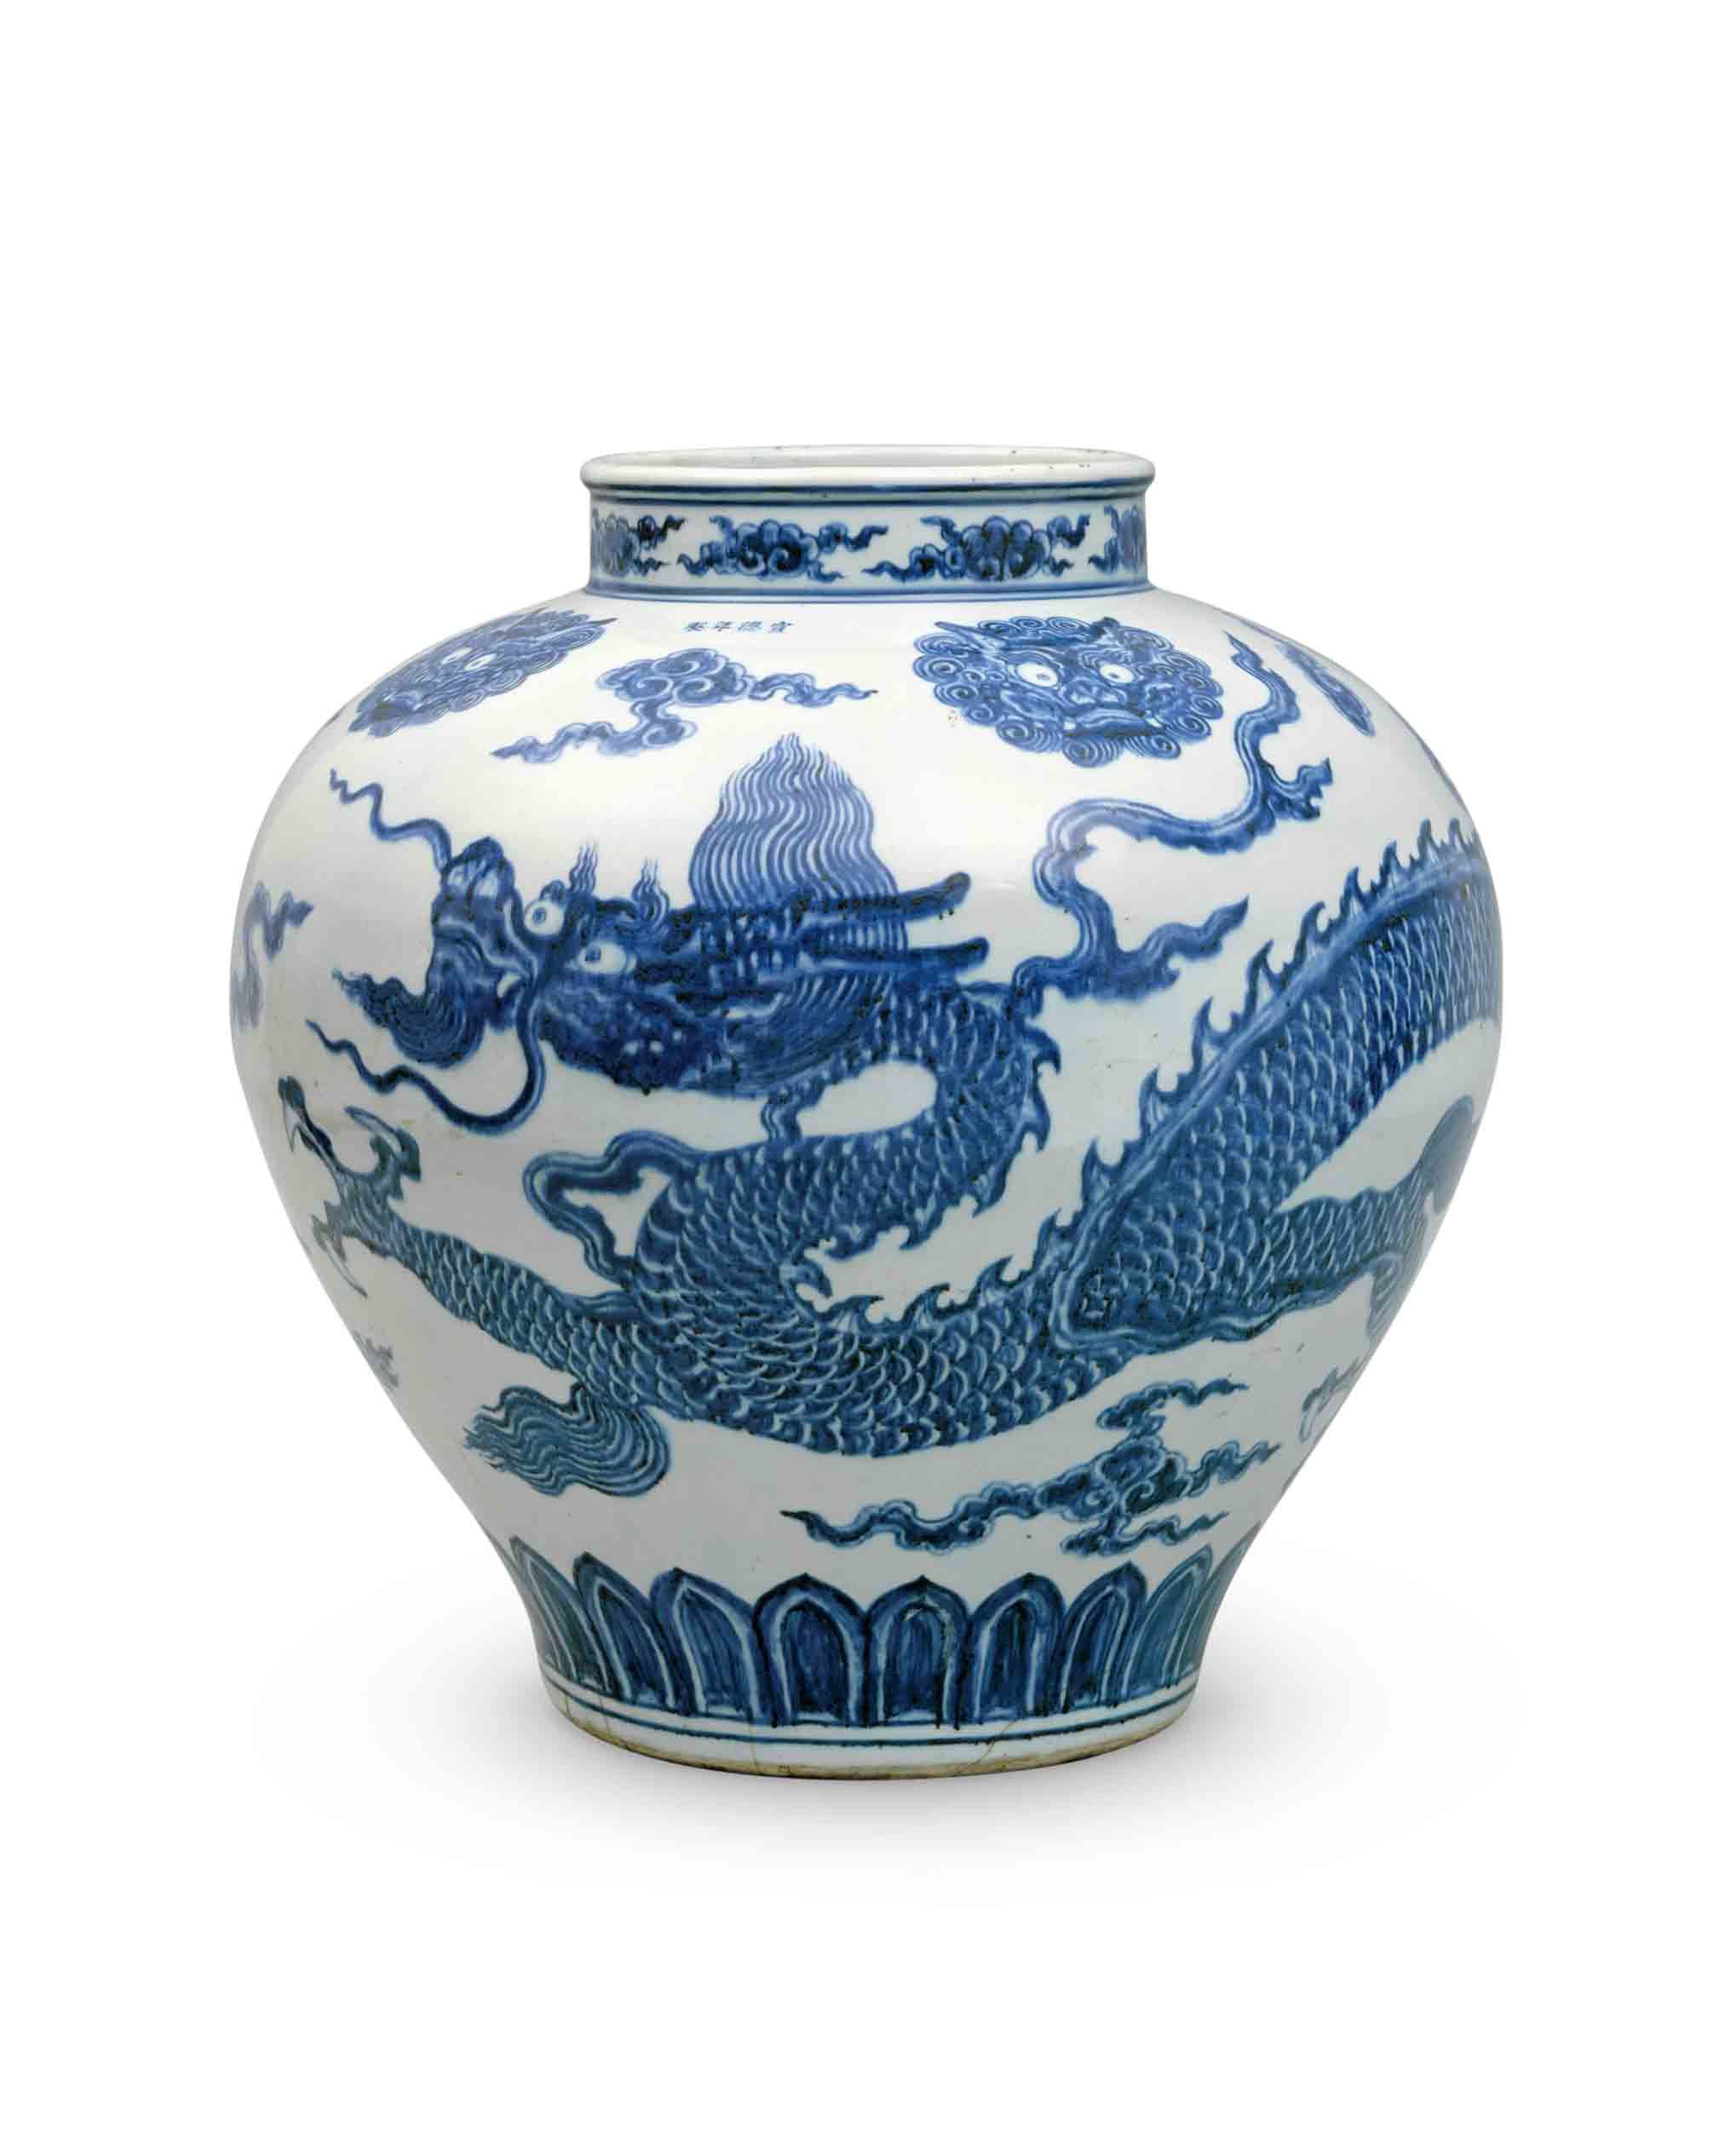 blue and white ceramics ming dynasty porcelain jar with a dragon illustration